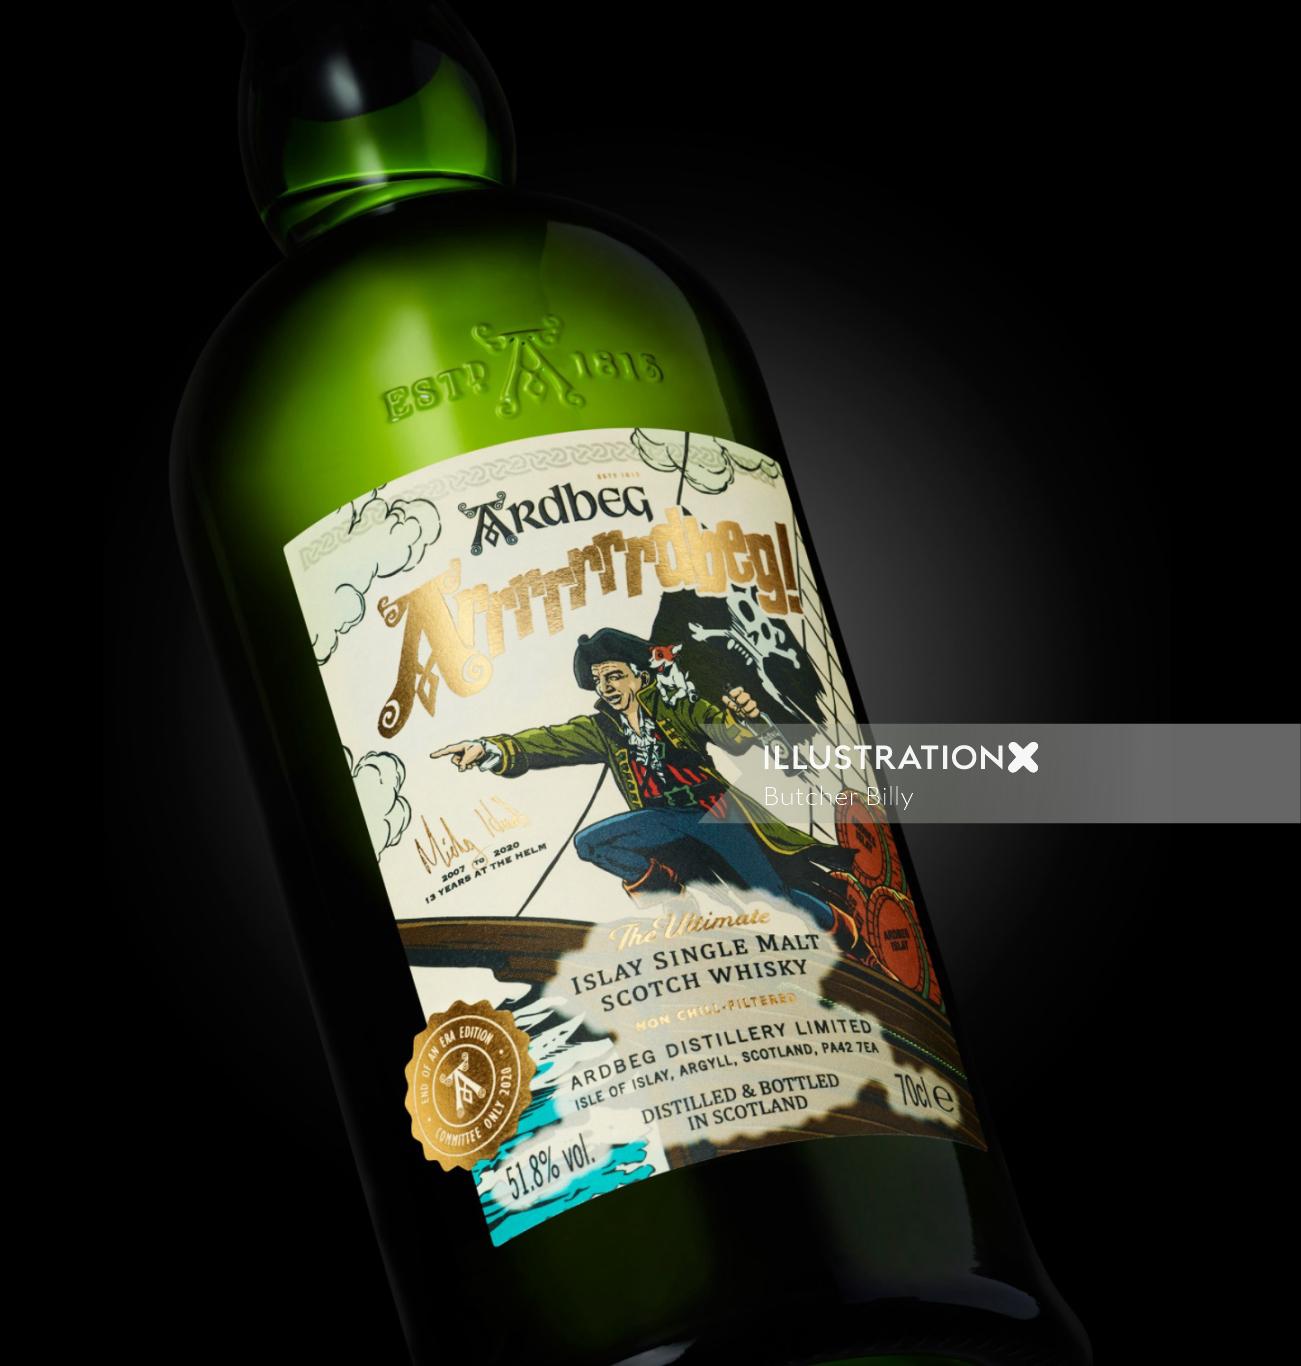 Limited-edition Ardbeg Scotch whisky with a distinctive label